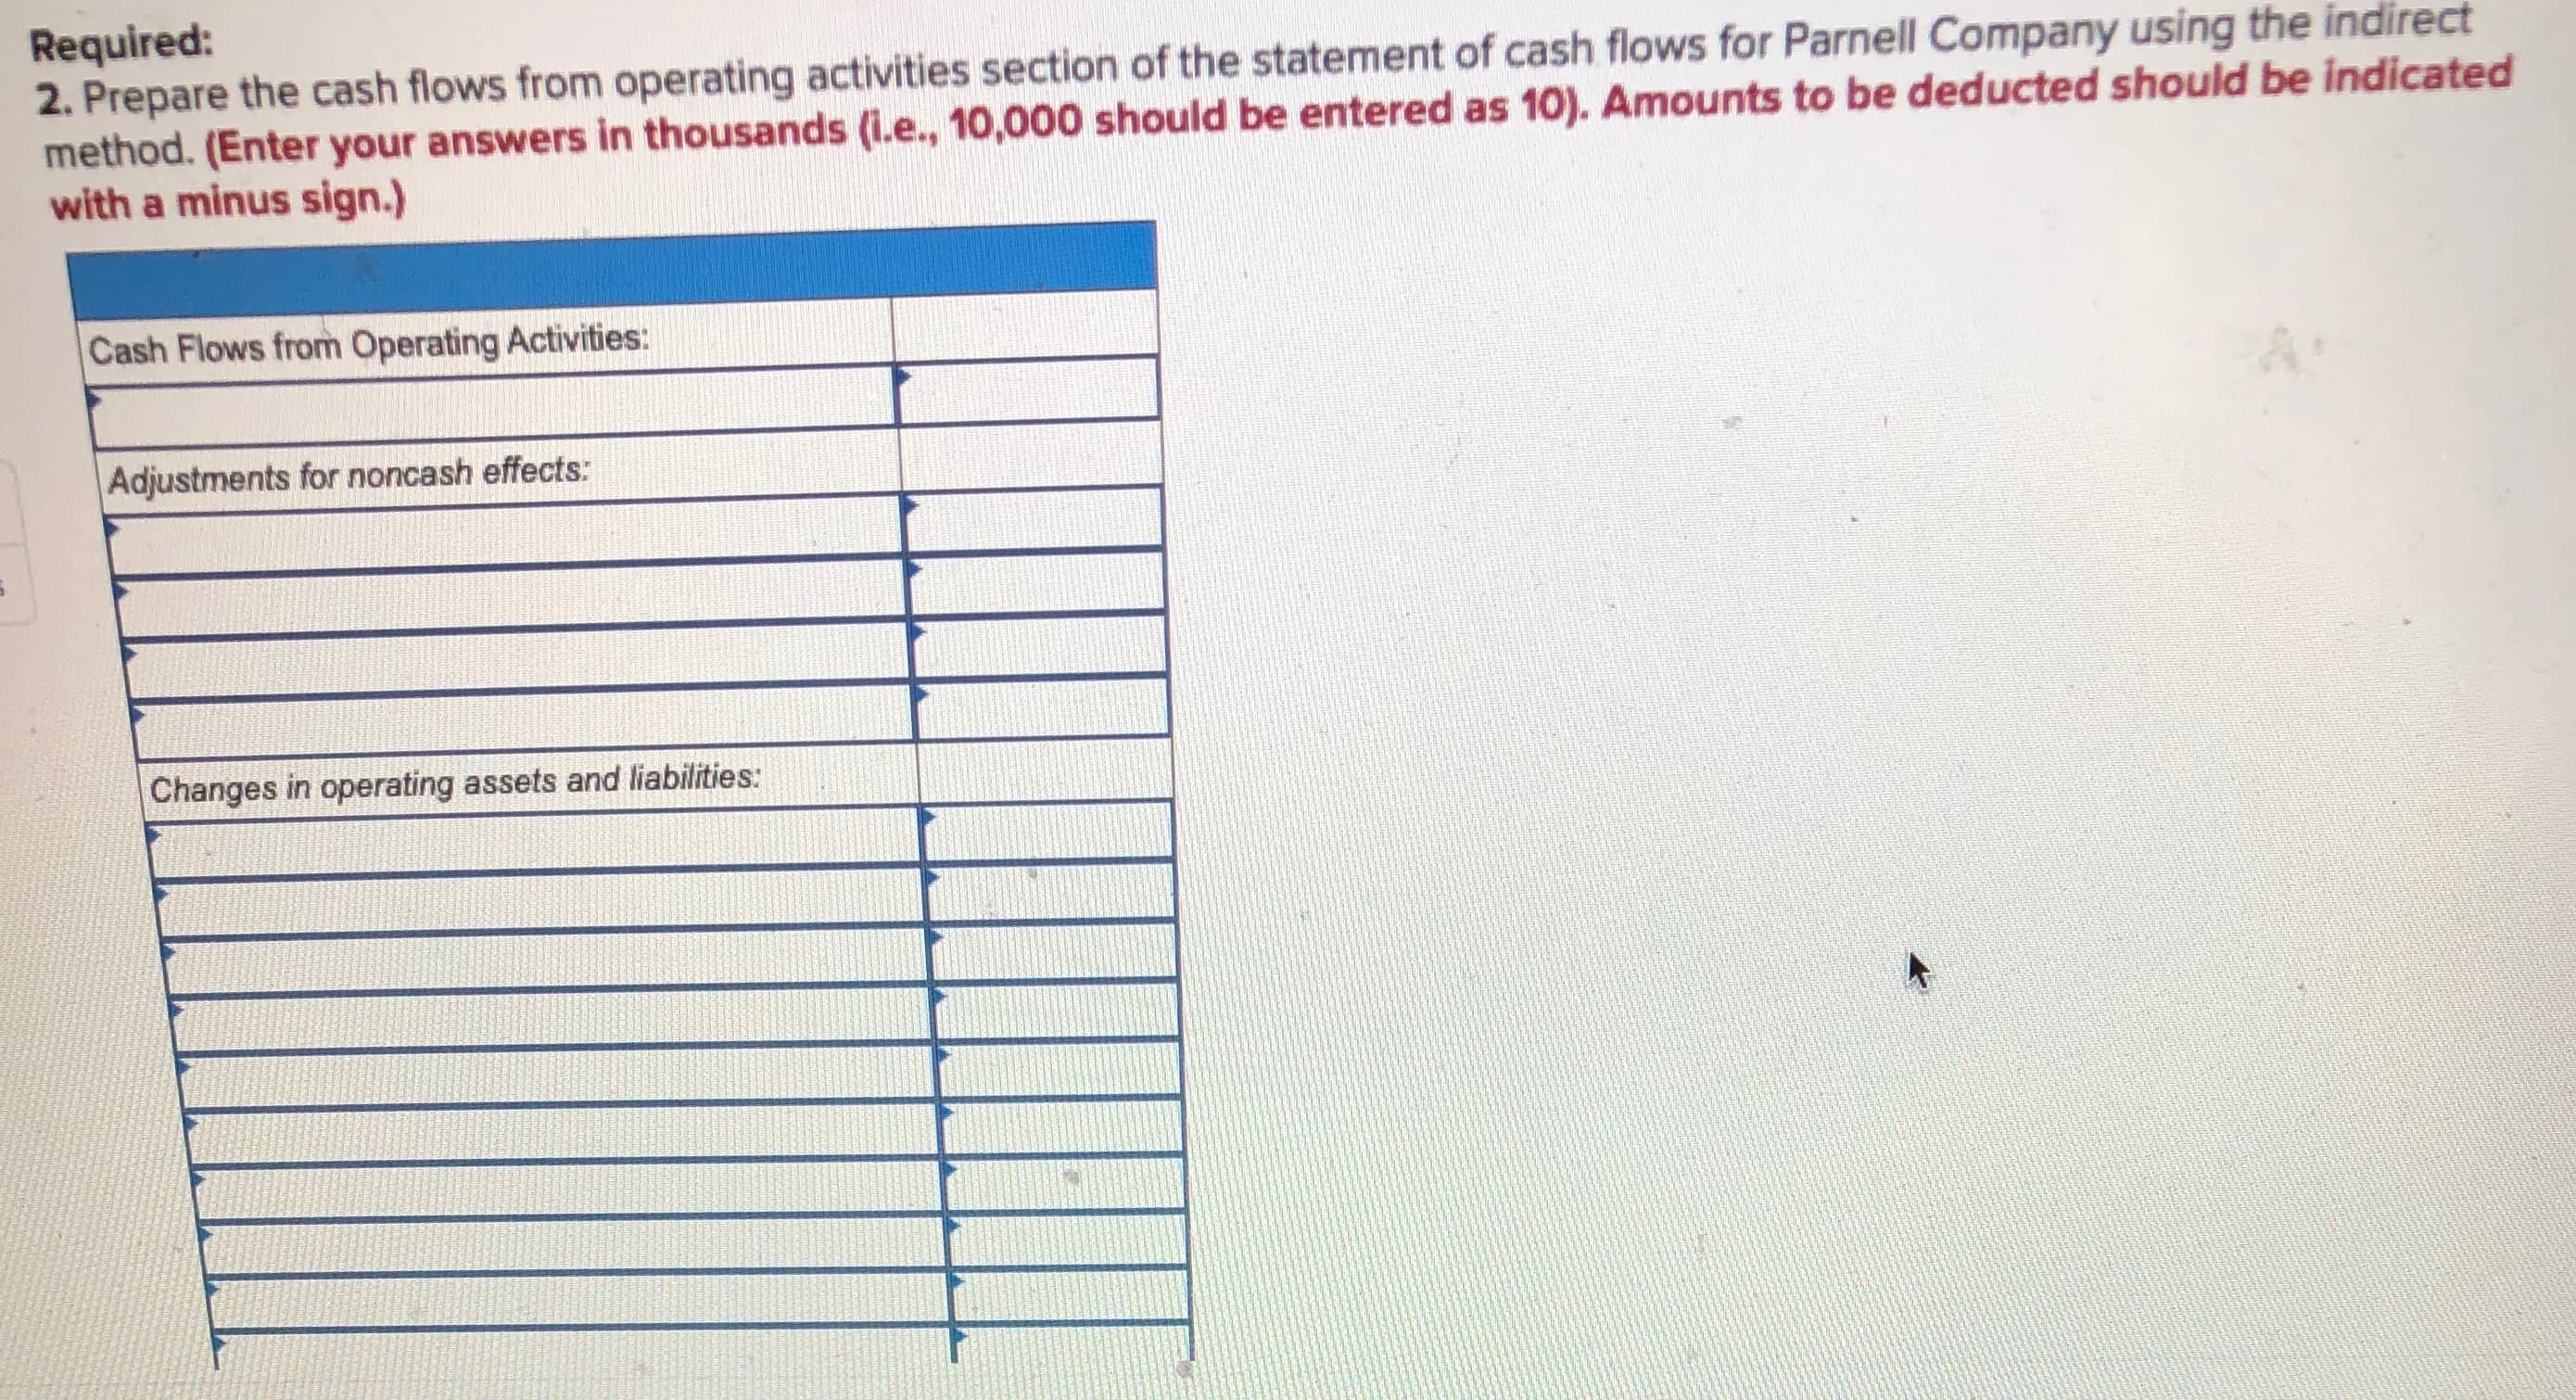 Required:
2. Prepare the cash flows from operating activities section of the statement of cash flows for Parnell Company using the indirect
method. (Enter your answers in thousands (i.e., 10,000 should be entered as 10). Amounts to be deducted should be indicated
with a minus sign.)
Cash Flows from Operating Activities:
Adjustments for noncash effects:
Changes in operating assets and liabilities:
